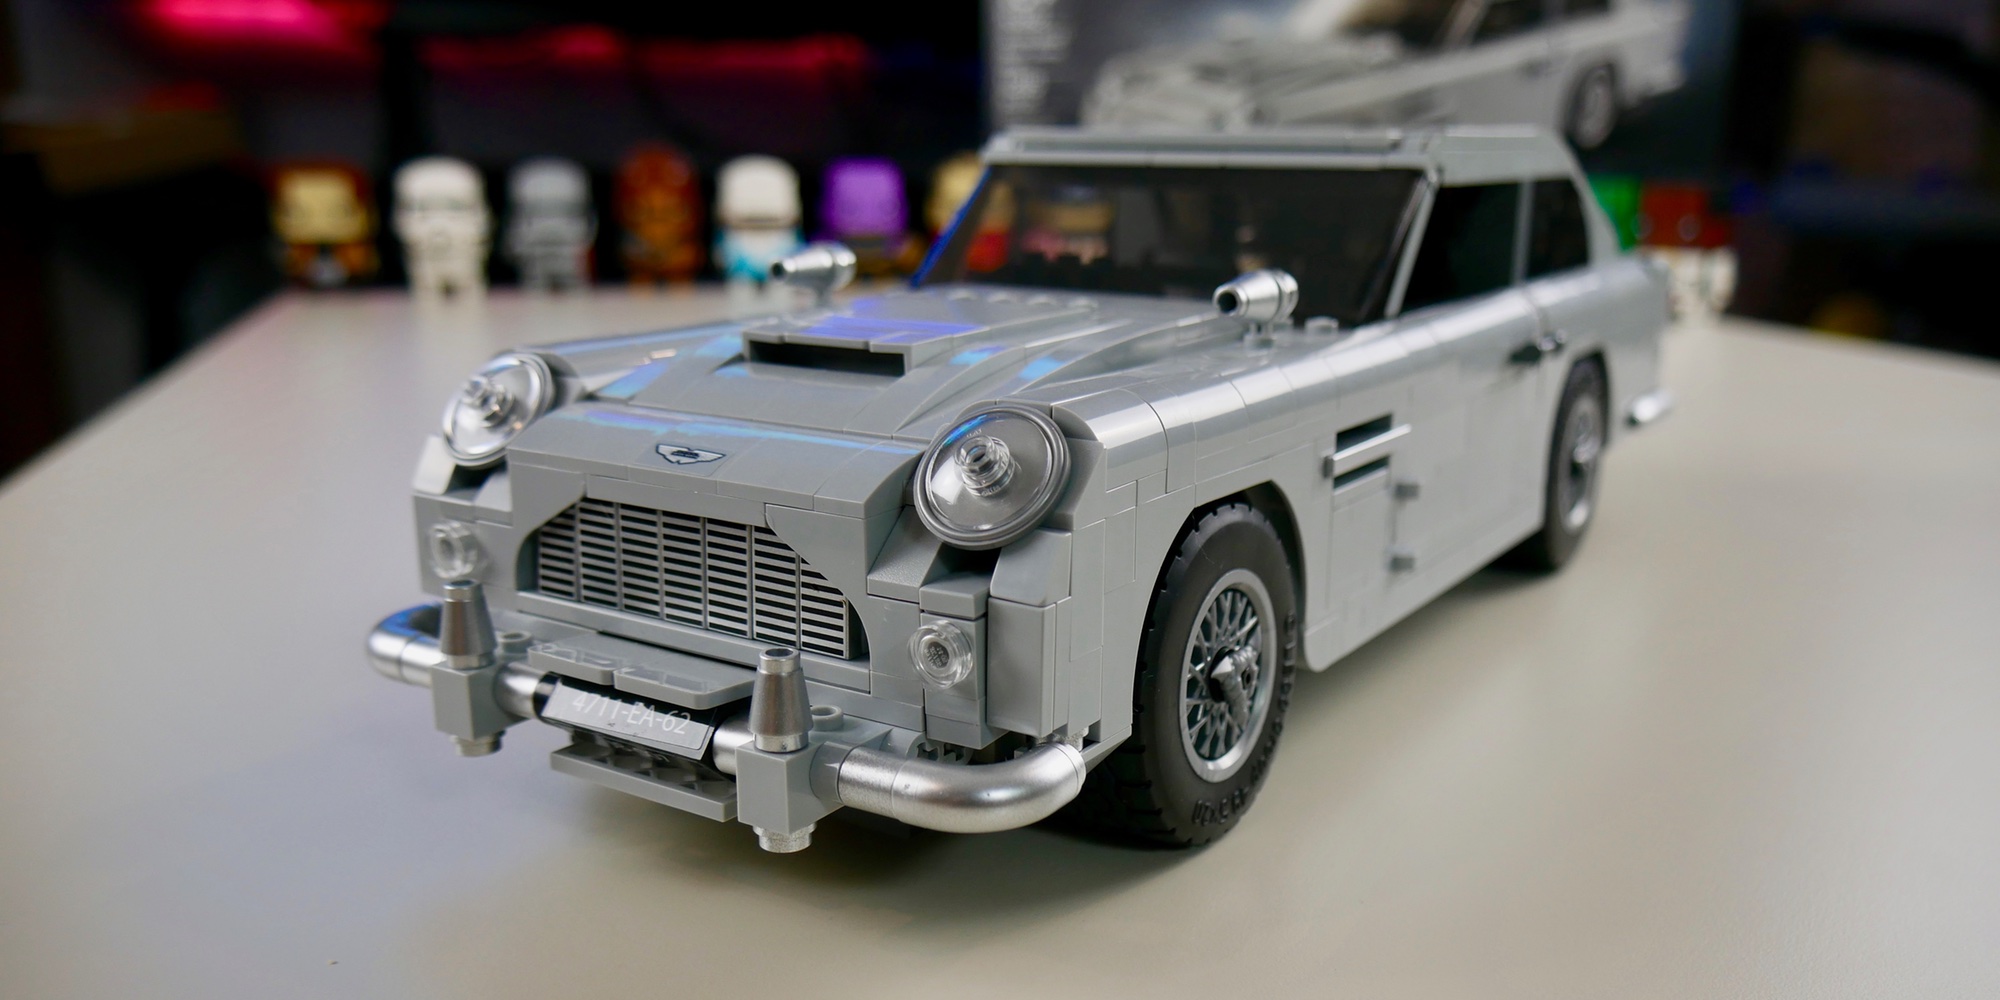 Review: LEGO's 007 Aston Martin DB5 packs striking design and impressive functionality - 9to5Toys